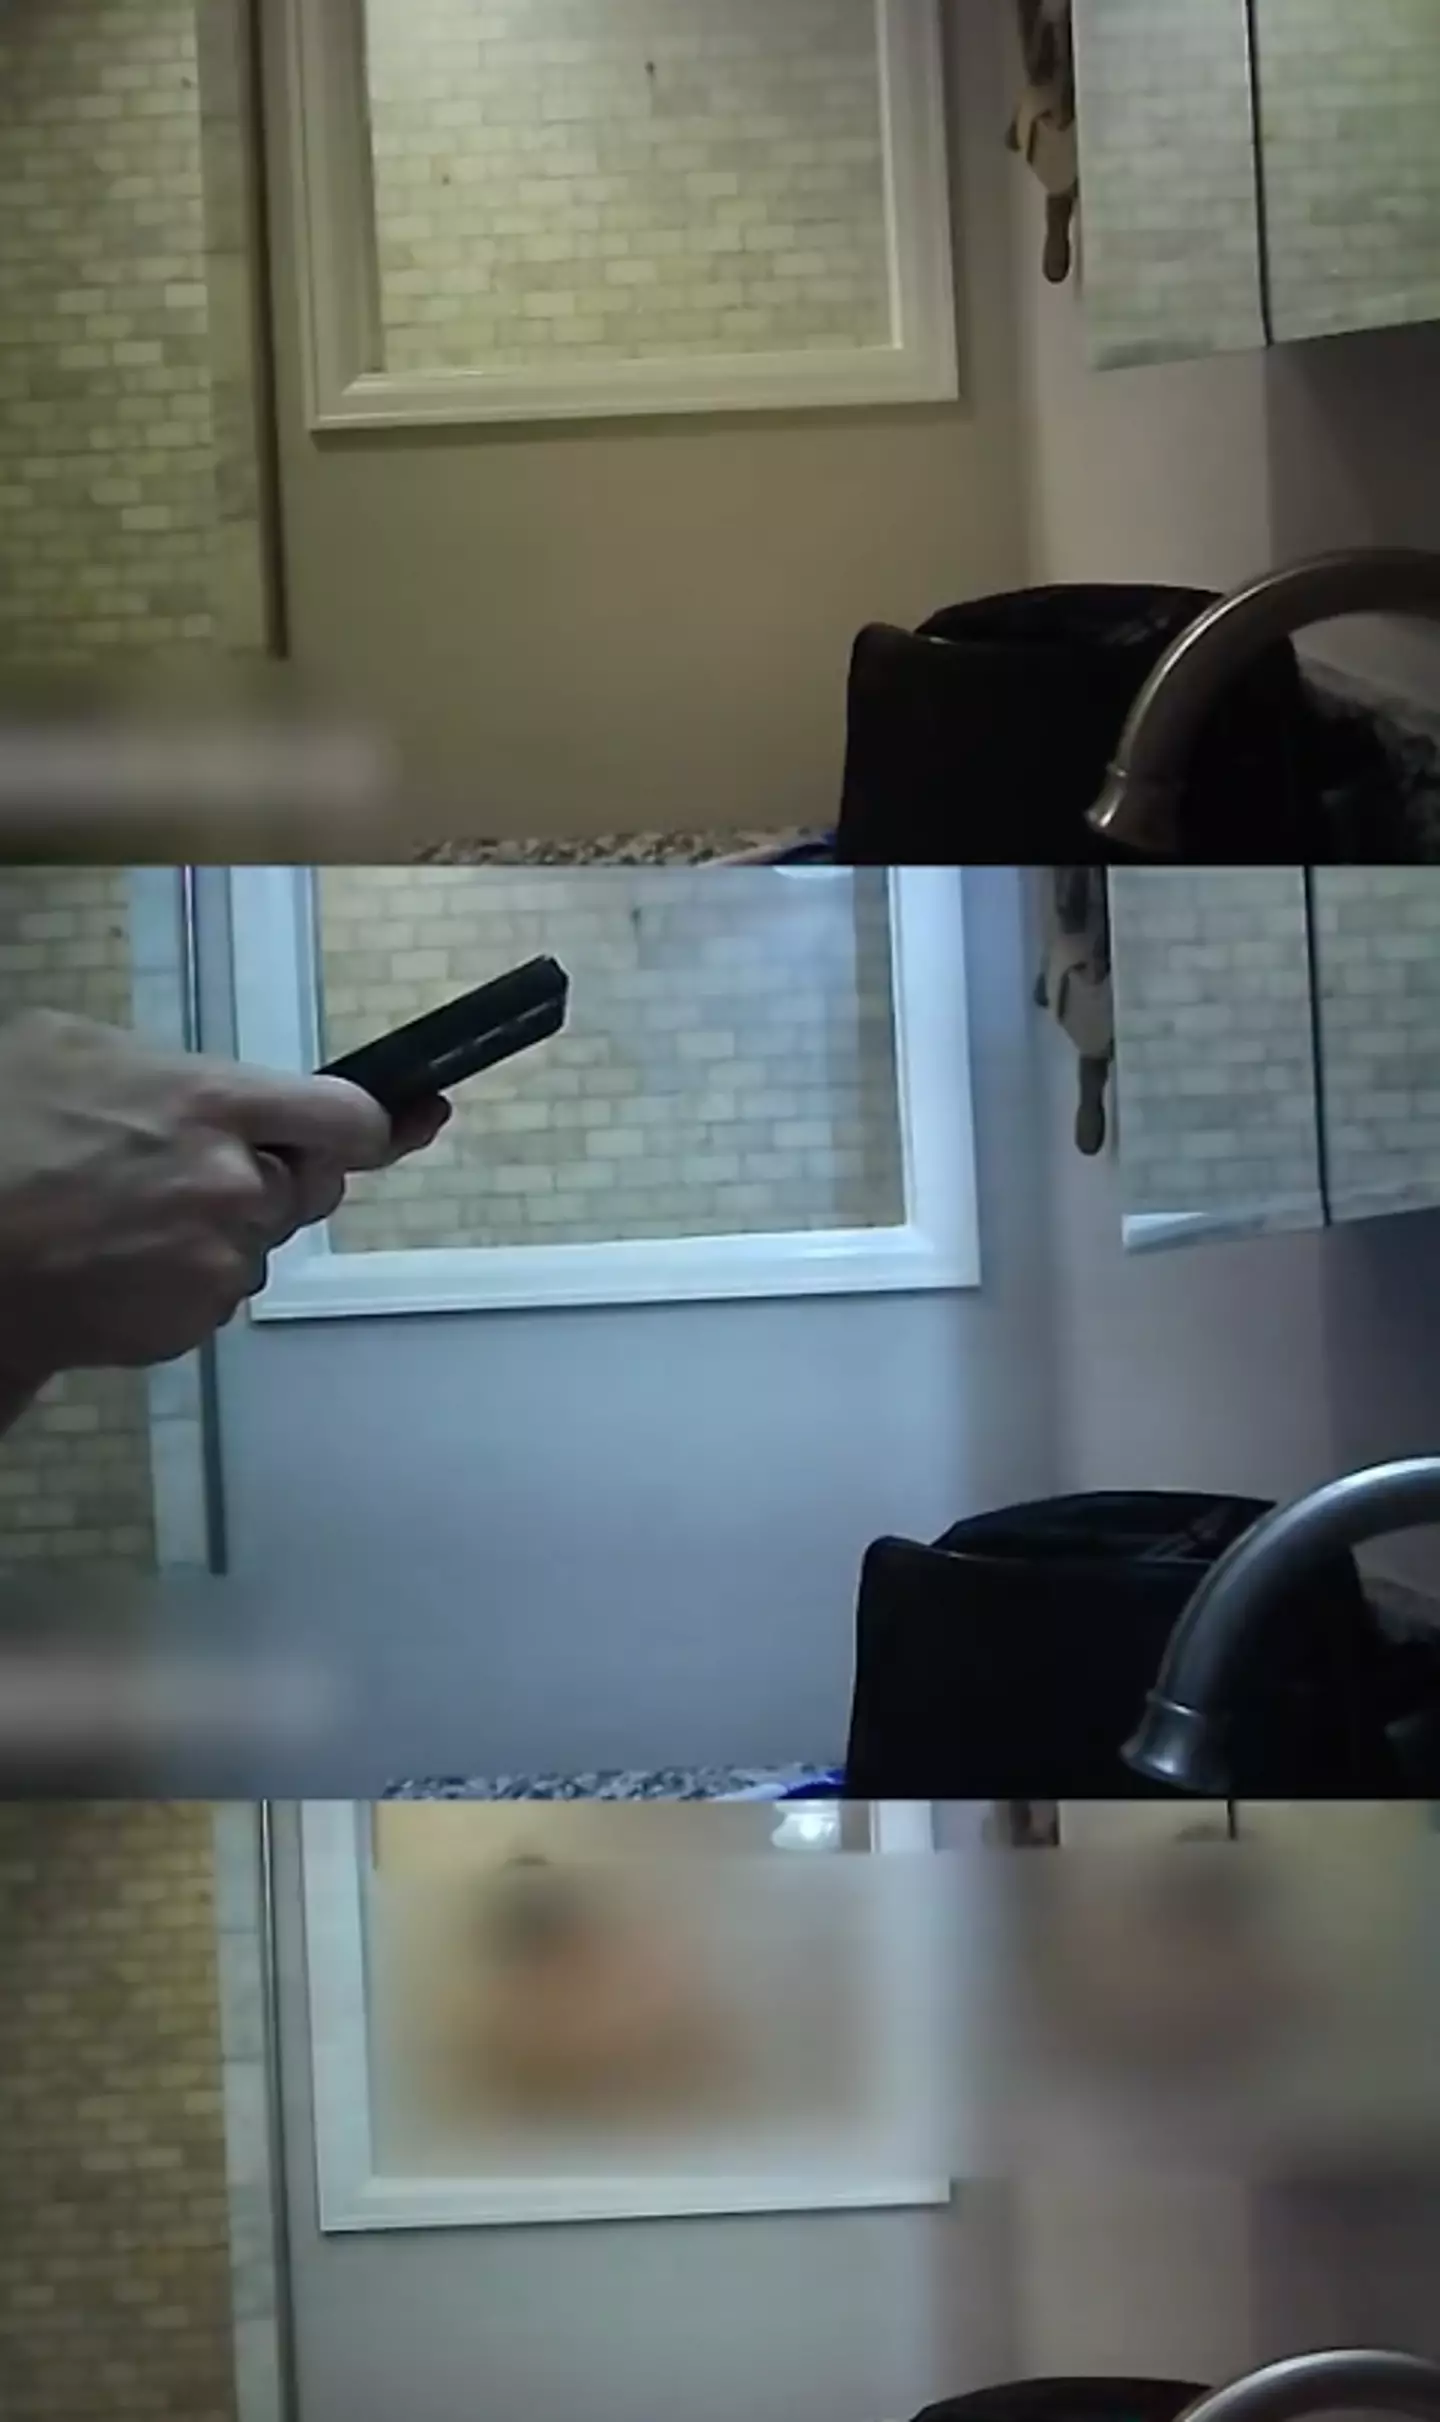 Some of the footage from the hidden camera.